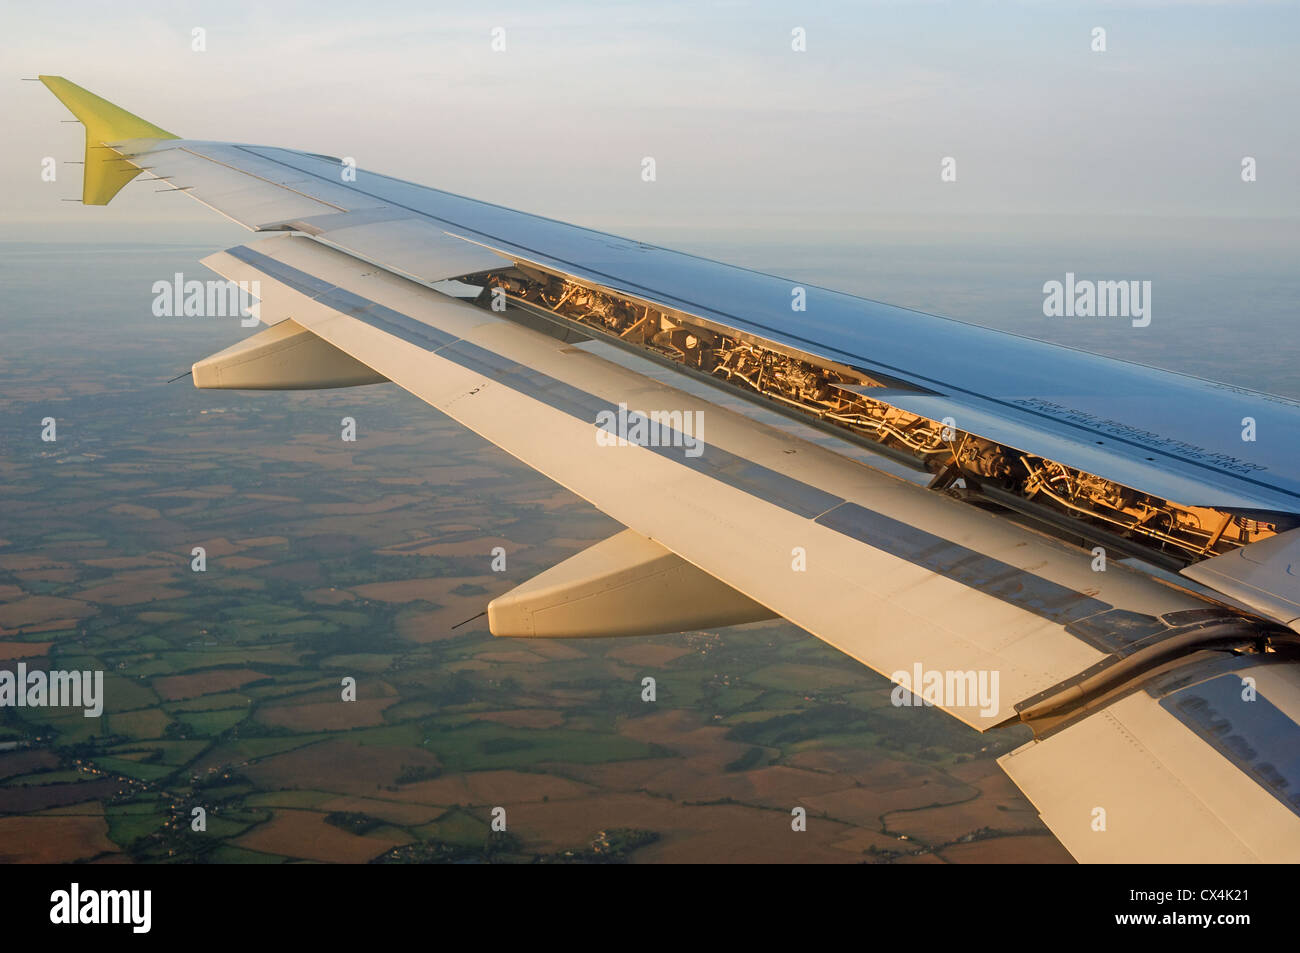 Wing of an Airbus A319 commercial airliner with flaps down coming into land at London Stansted airport, Essex, UK. Stock Photo